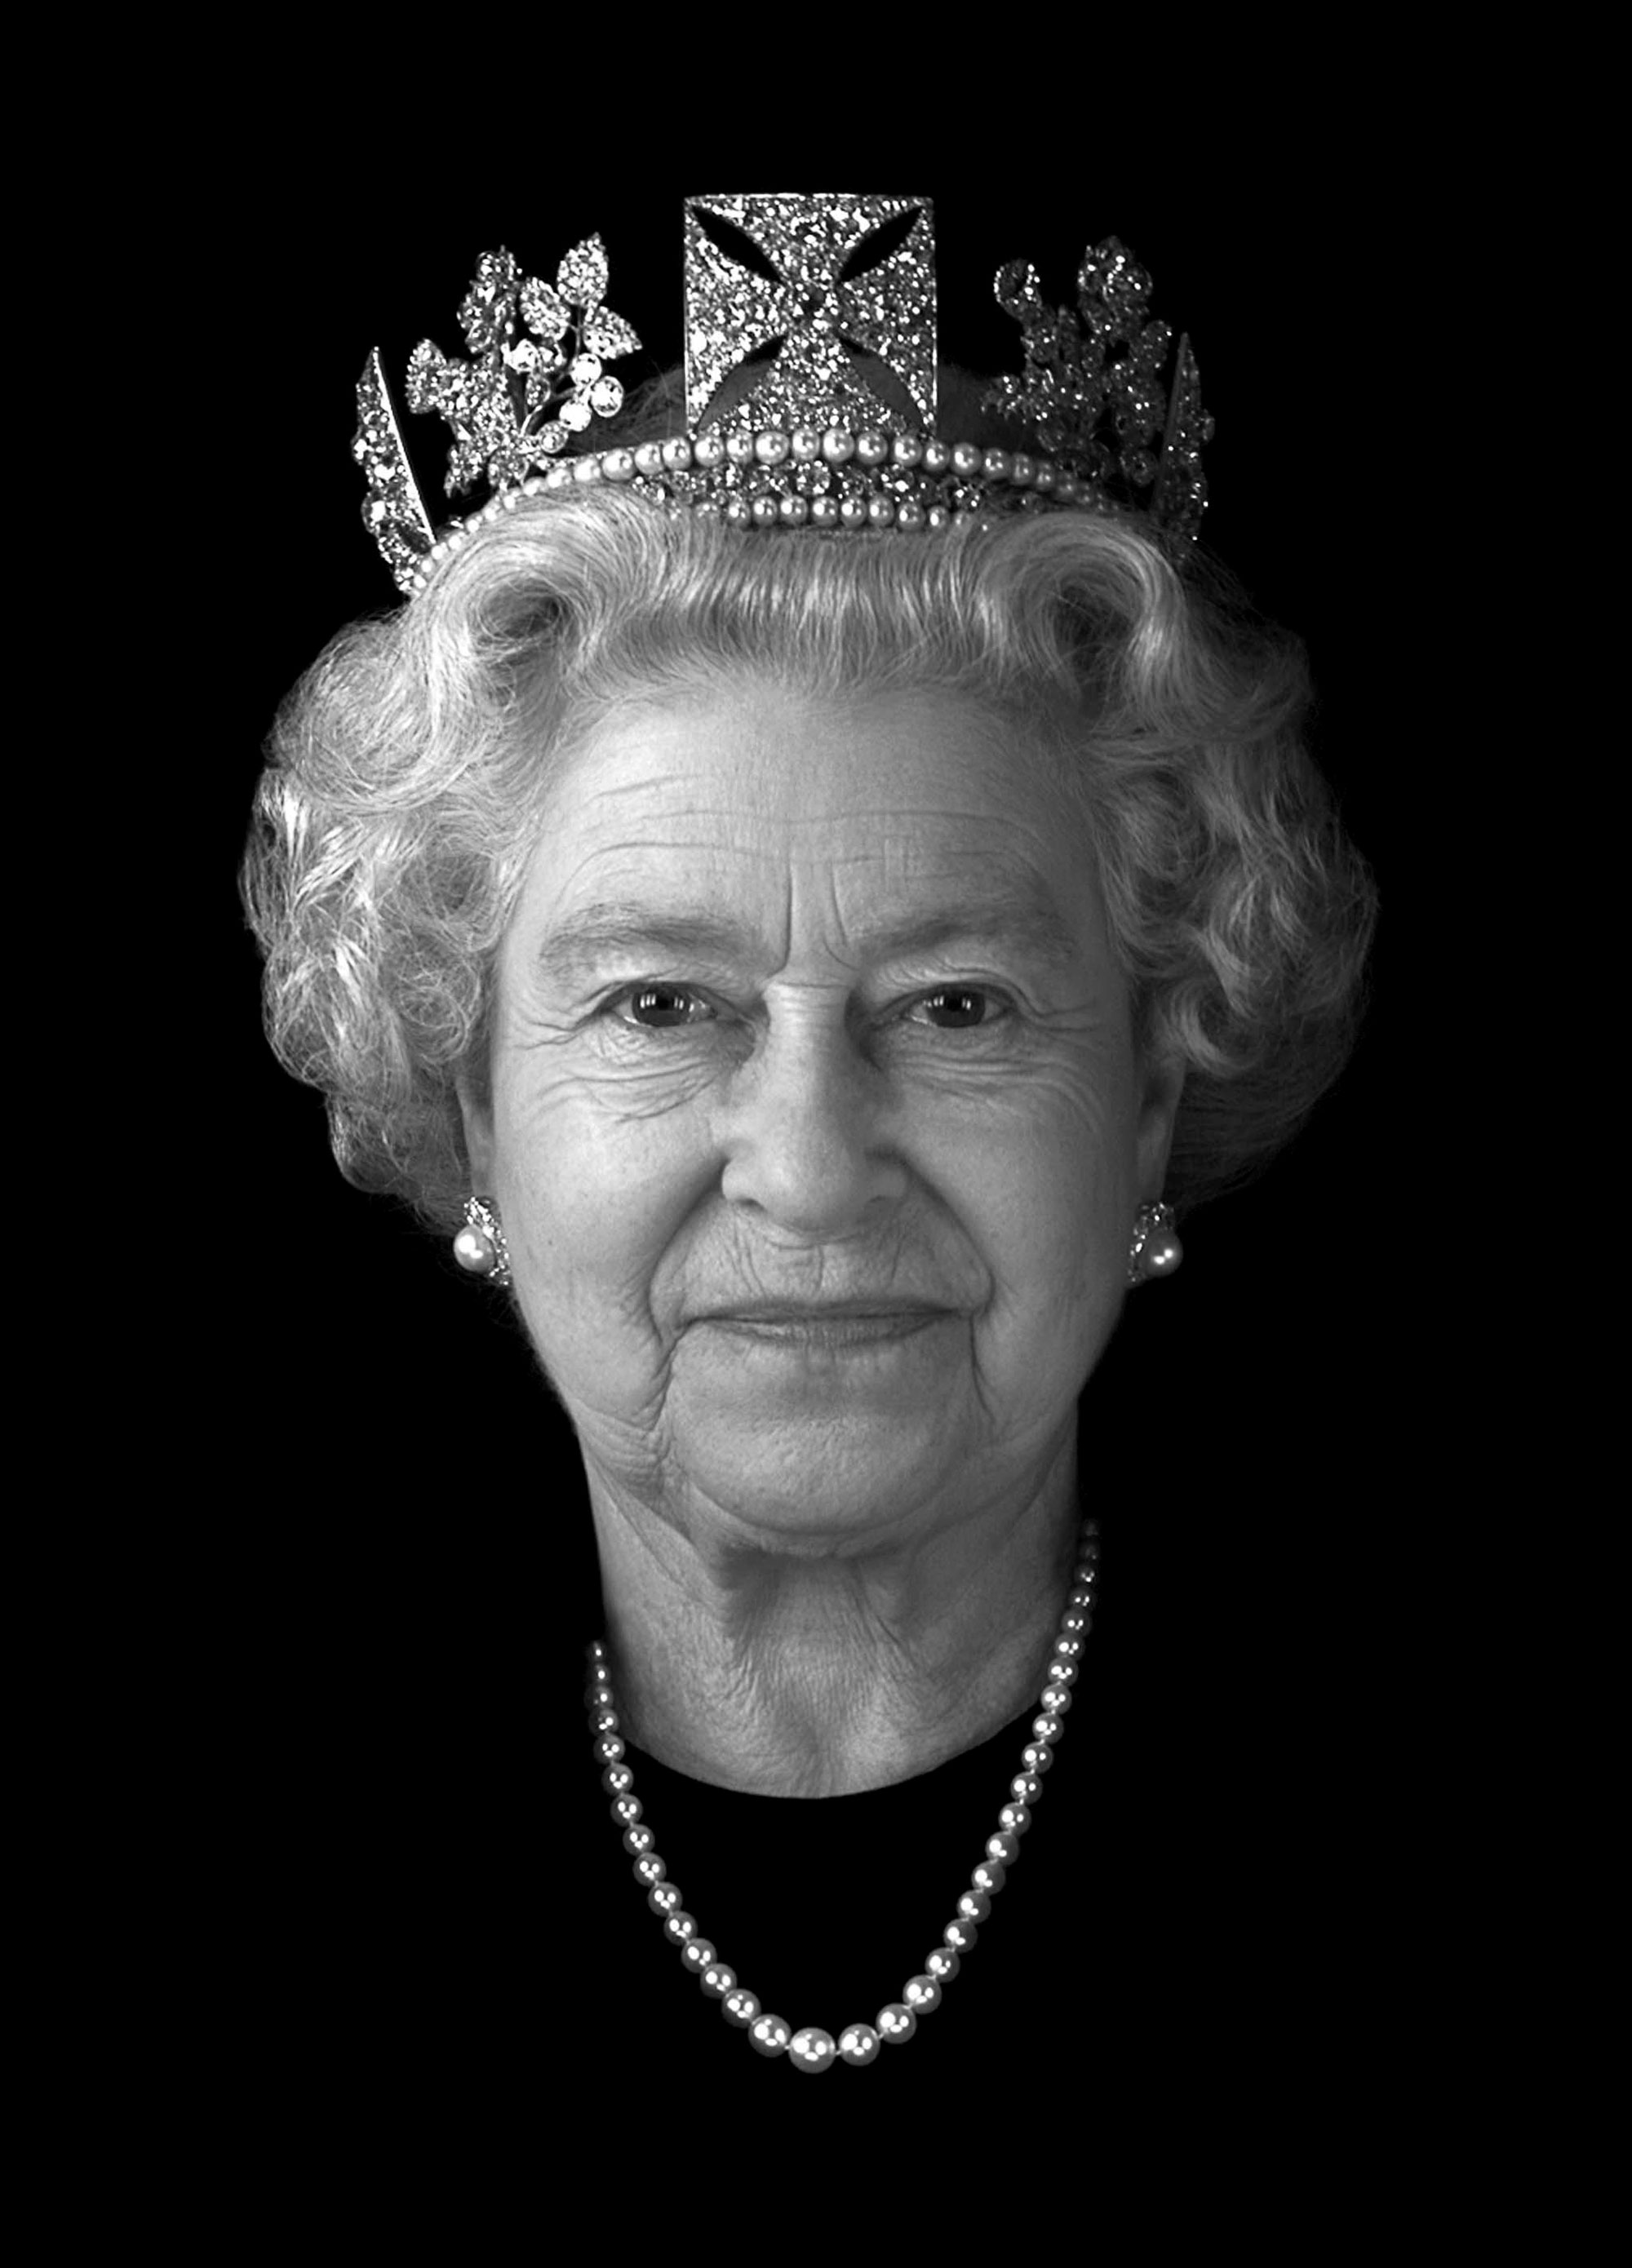 Felicity Platinum Queen By Rob Munday For RPS